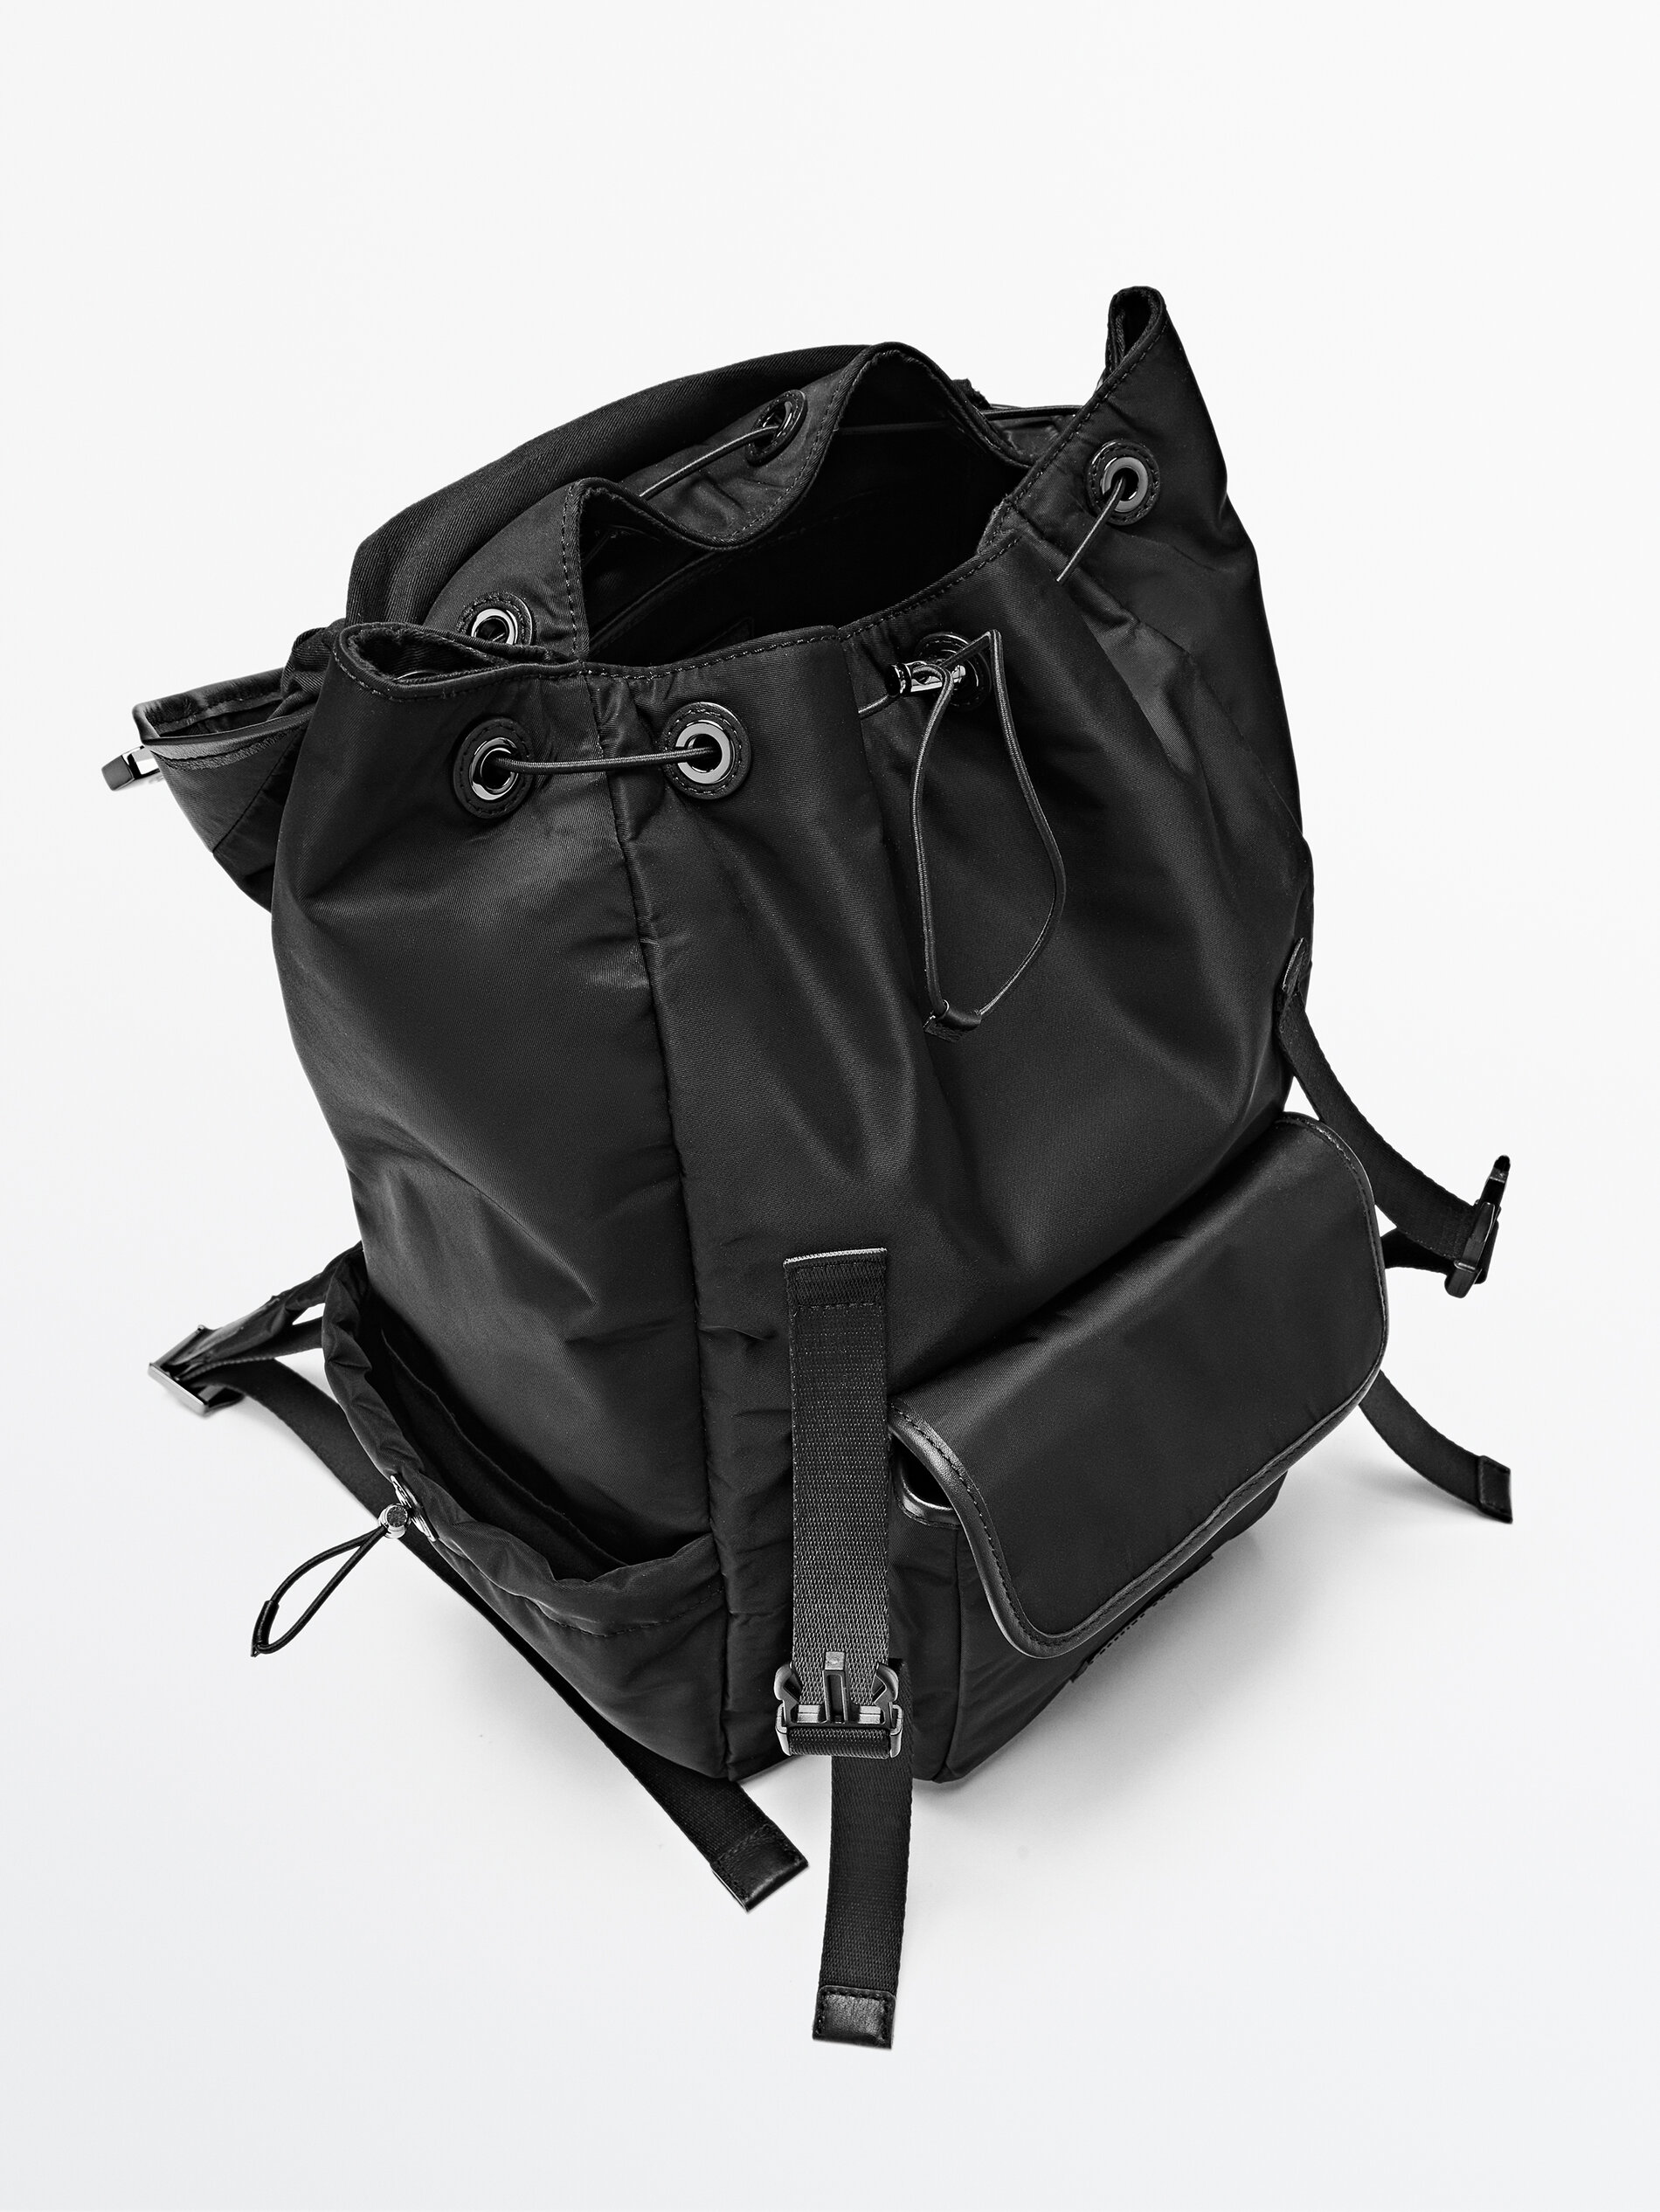 The guests cubic Spectacle Massimo Dutti - Backpack with pockets and leather details